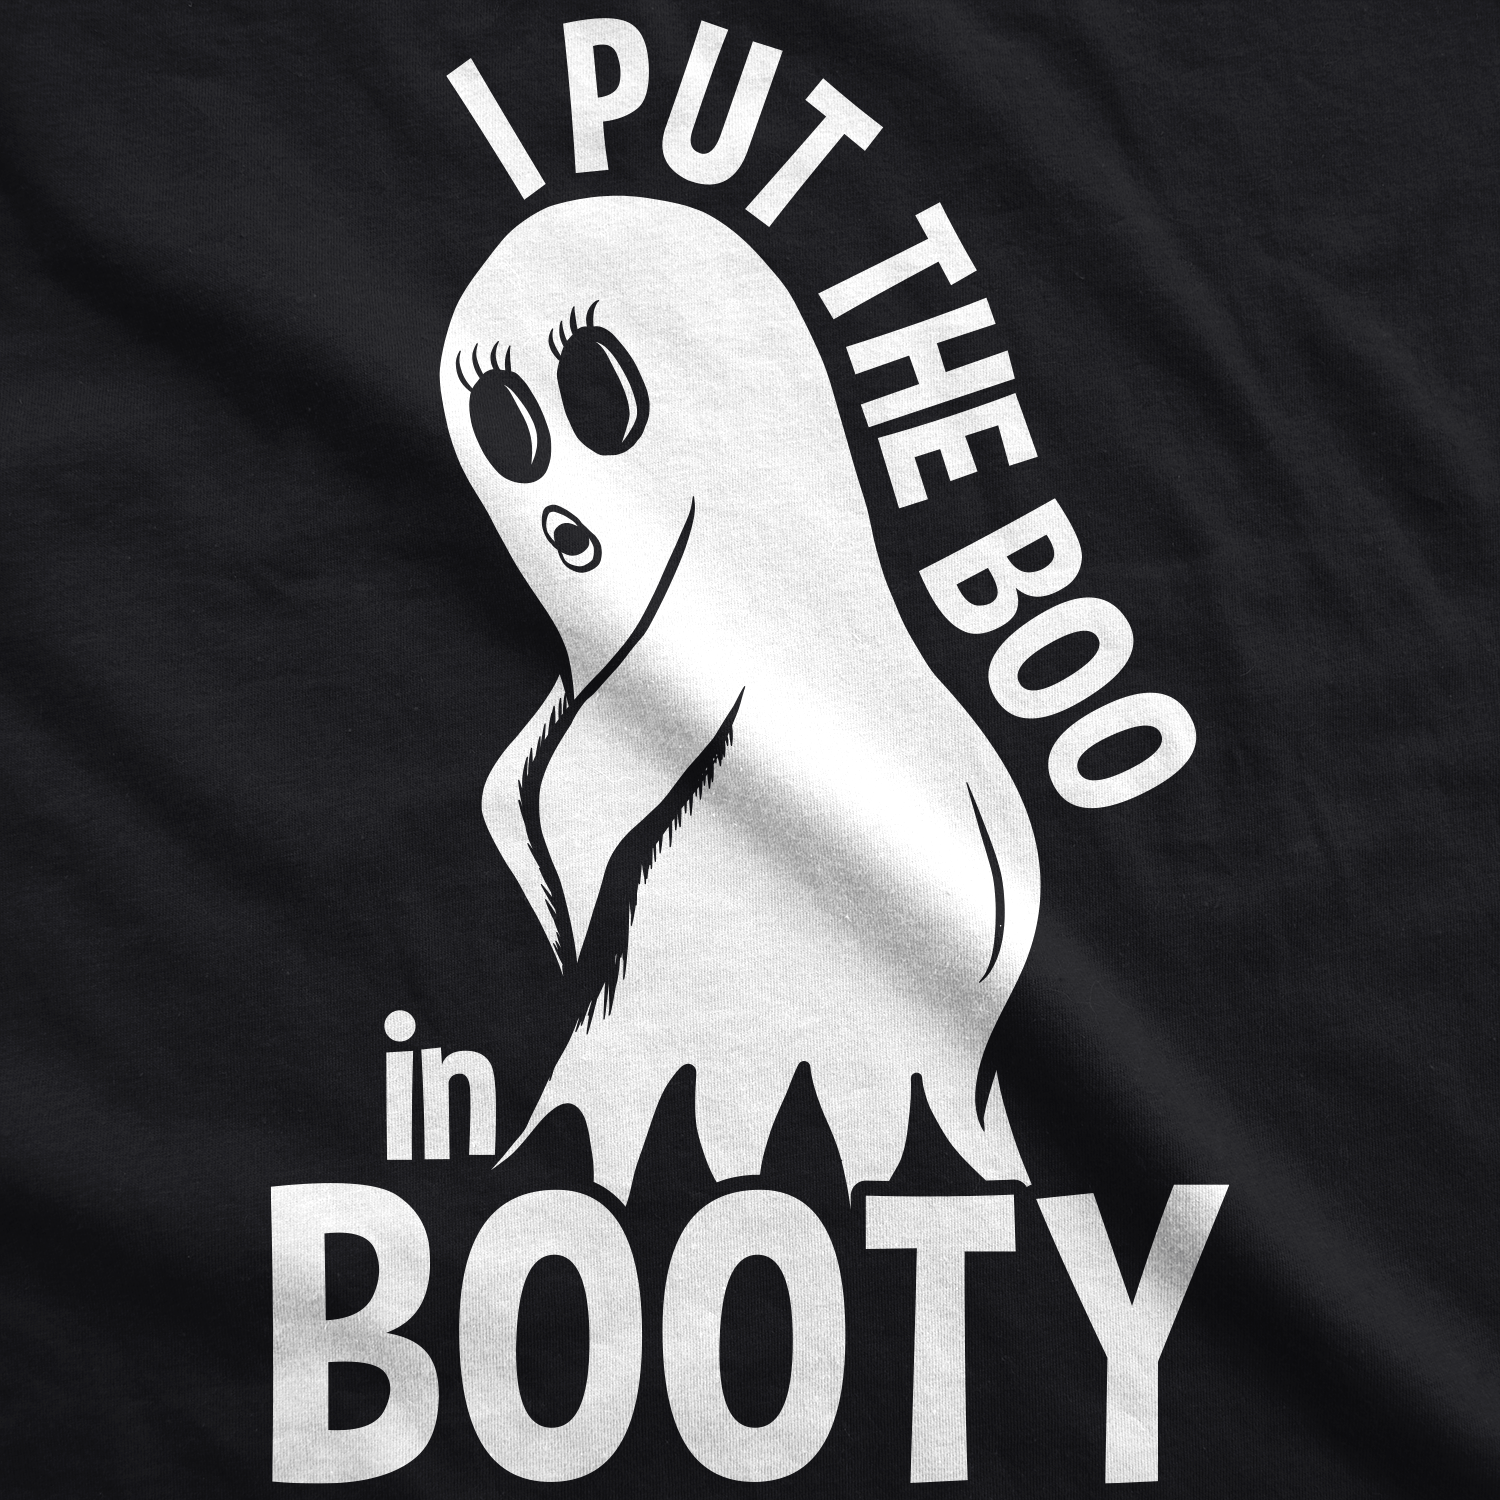 I Put The Boo In Booty Women's Tshirt - Crazy Dog T-Shirts